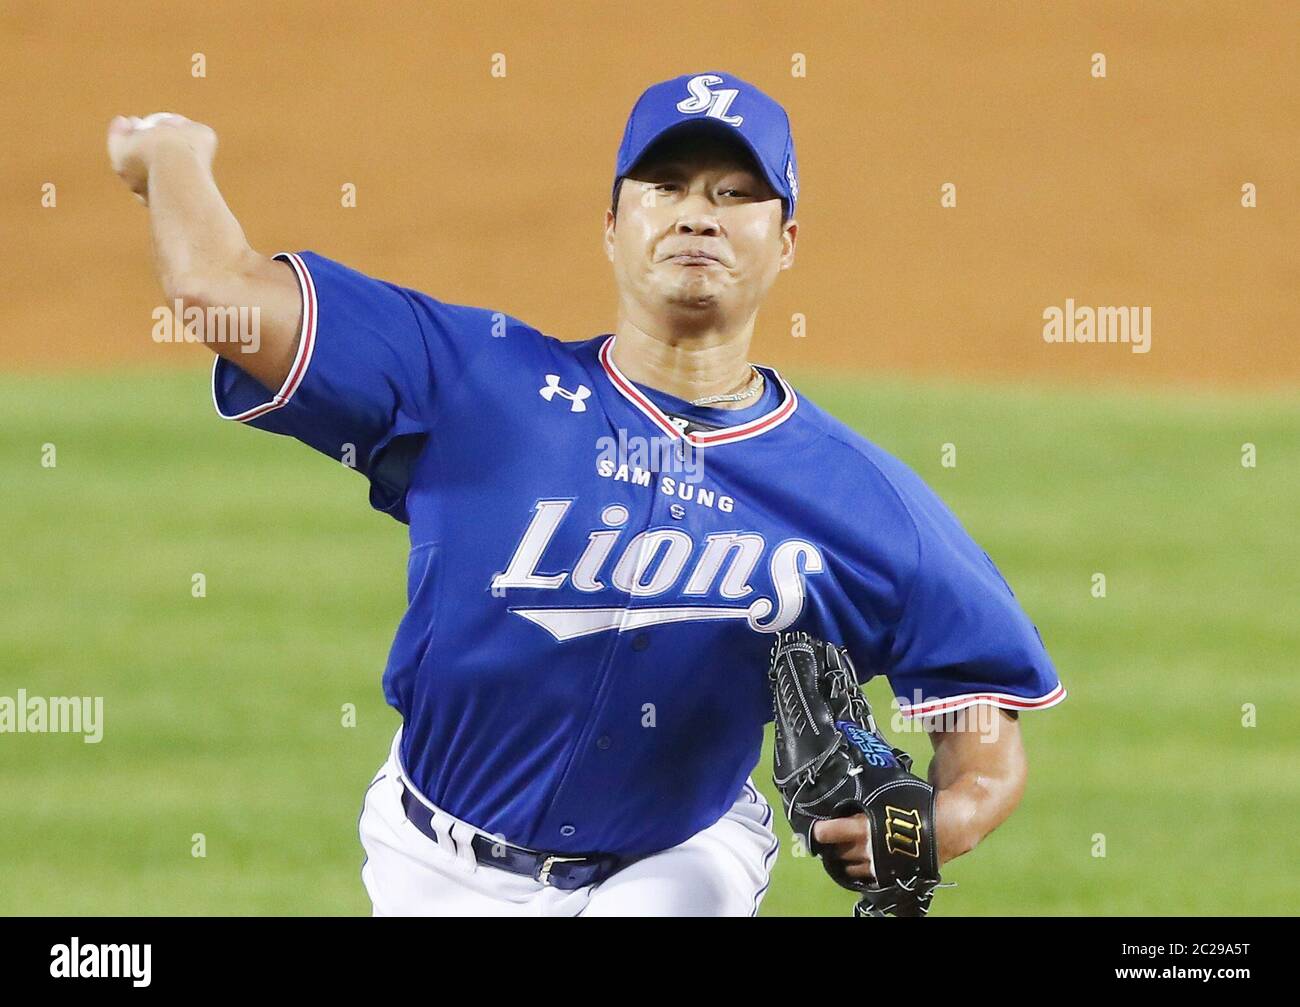 17th June S Korean Pitcher Oh Seung Hwan Oh Seung Hwan Of The Samsung Lions Pitches Against The Doosan Bears At A Korea Baseball Organization Match Held At Jamsil Baseball Stadium In Seoul